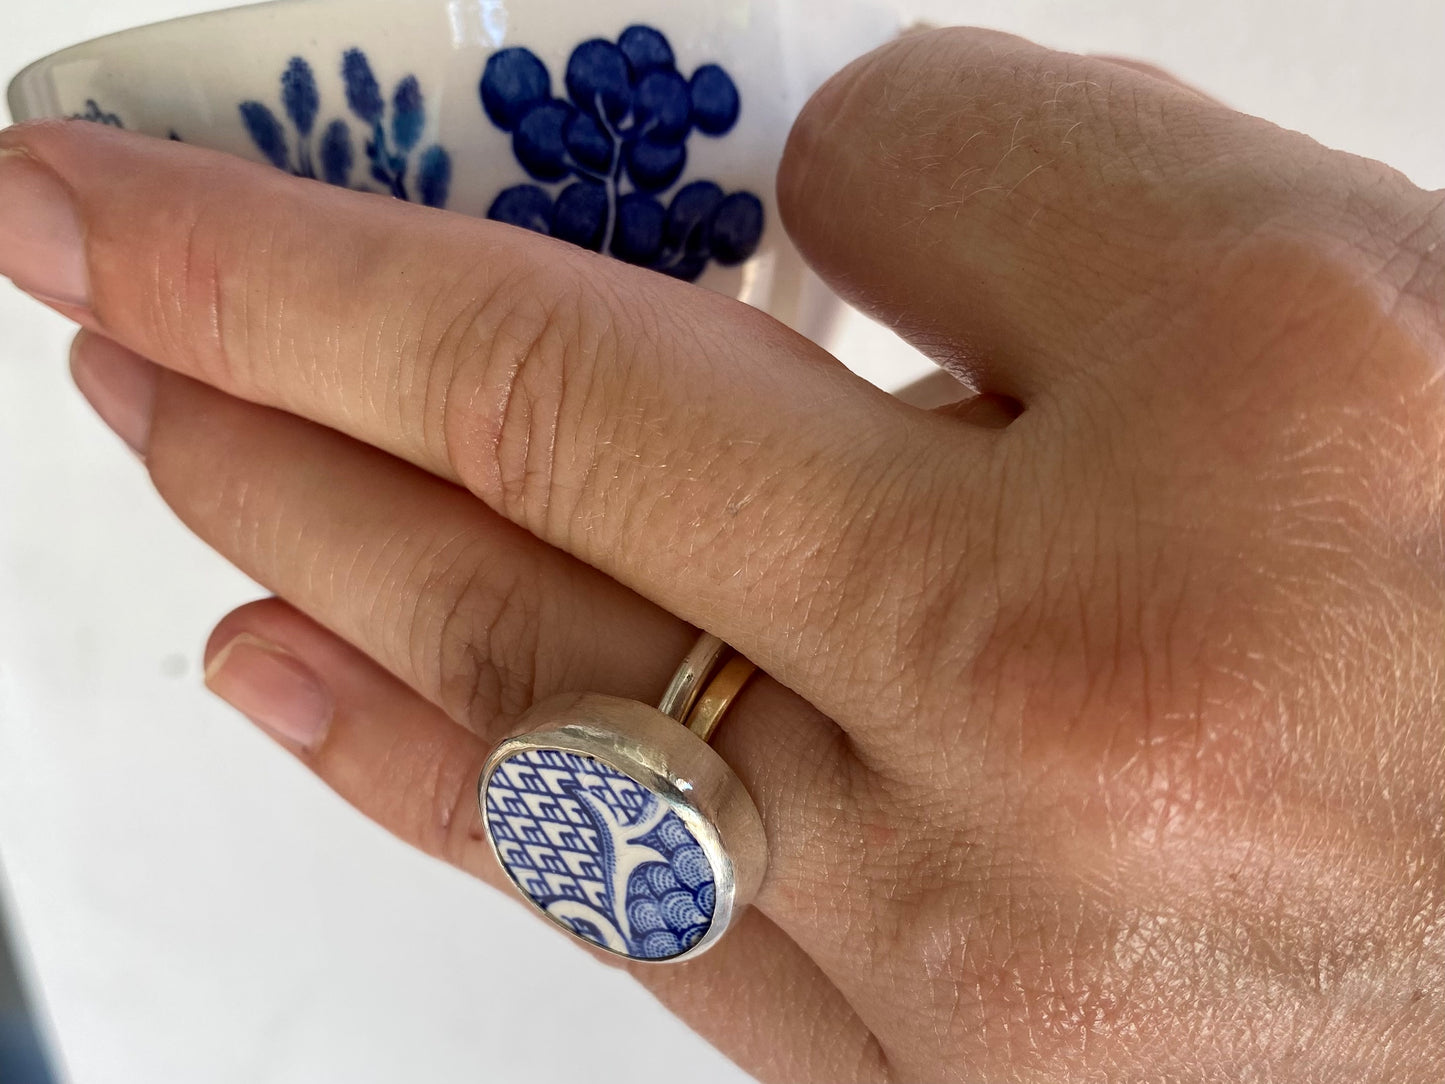 Willow pattern ceramic and silver Ring